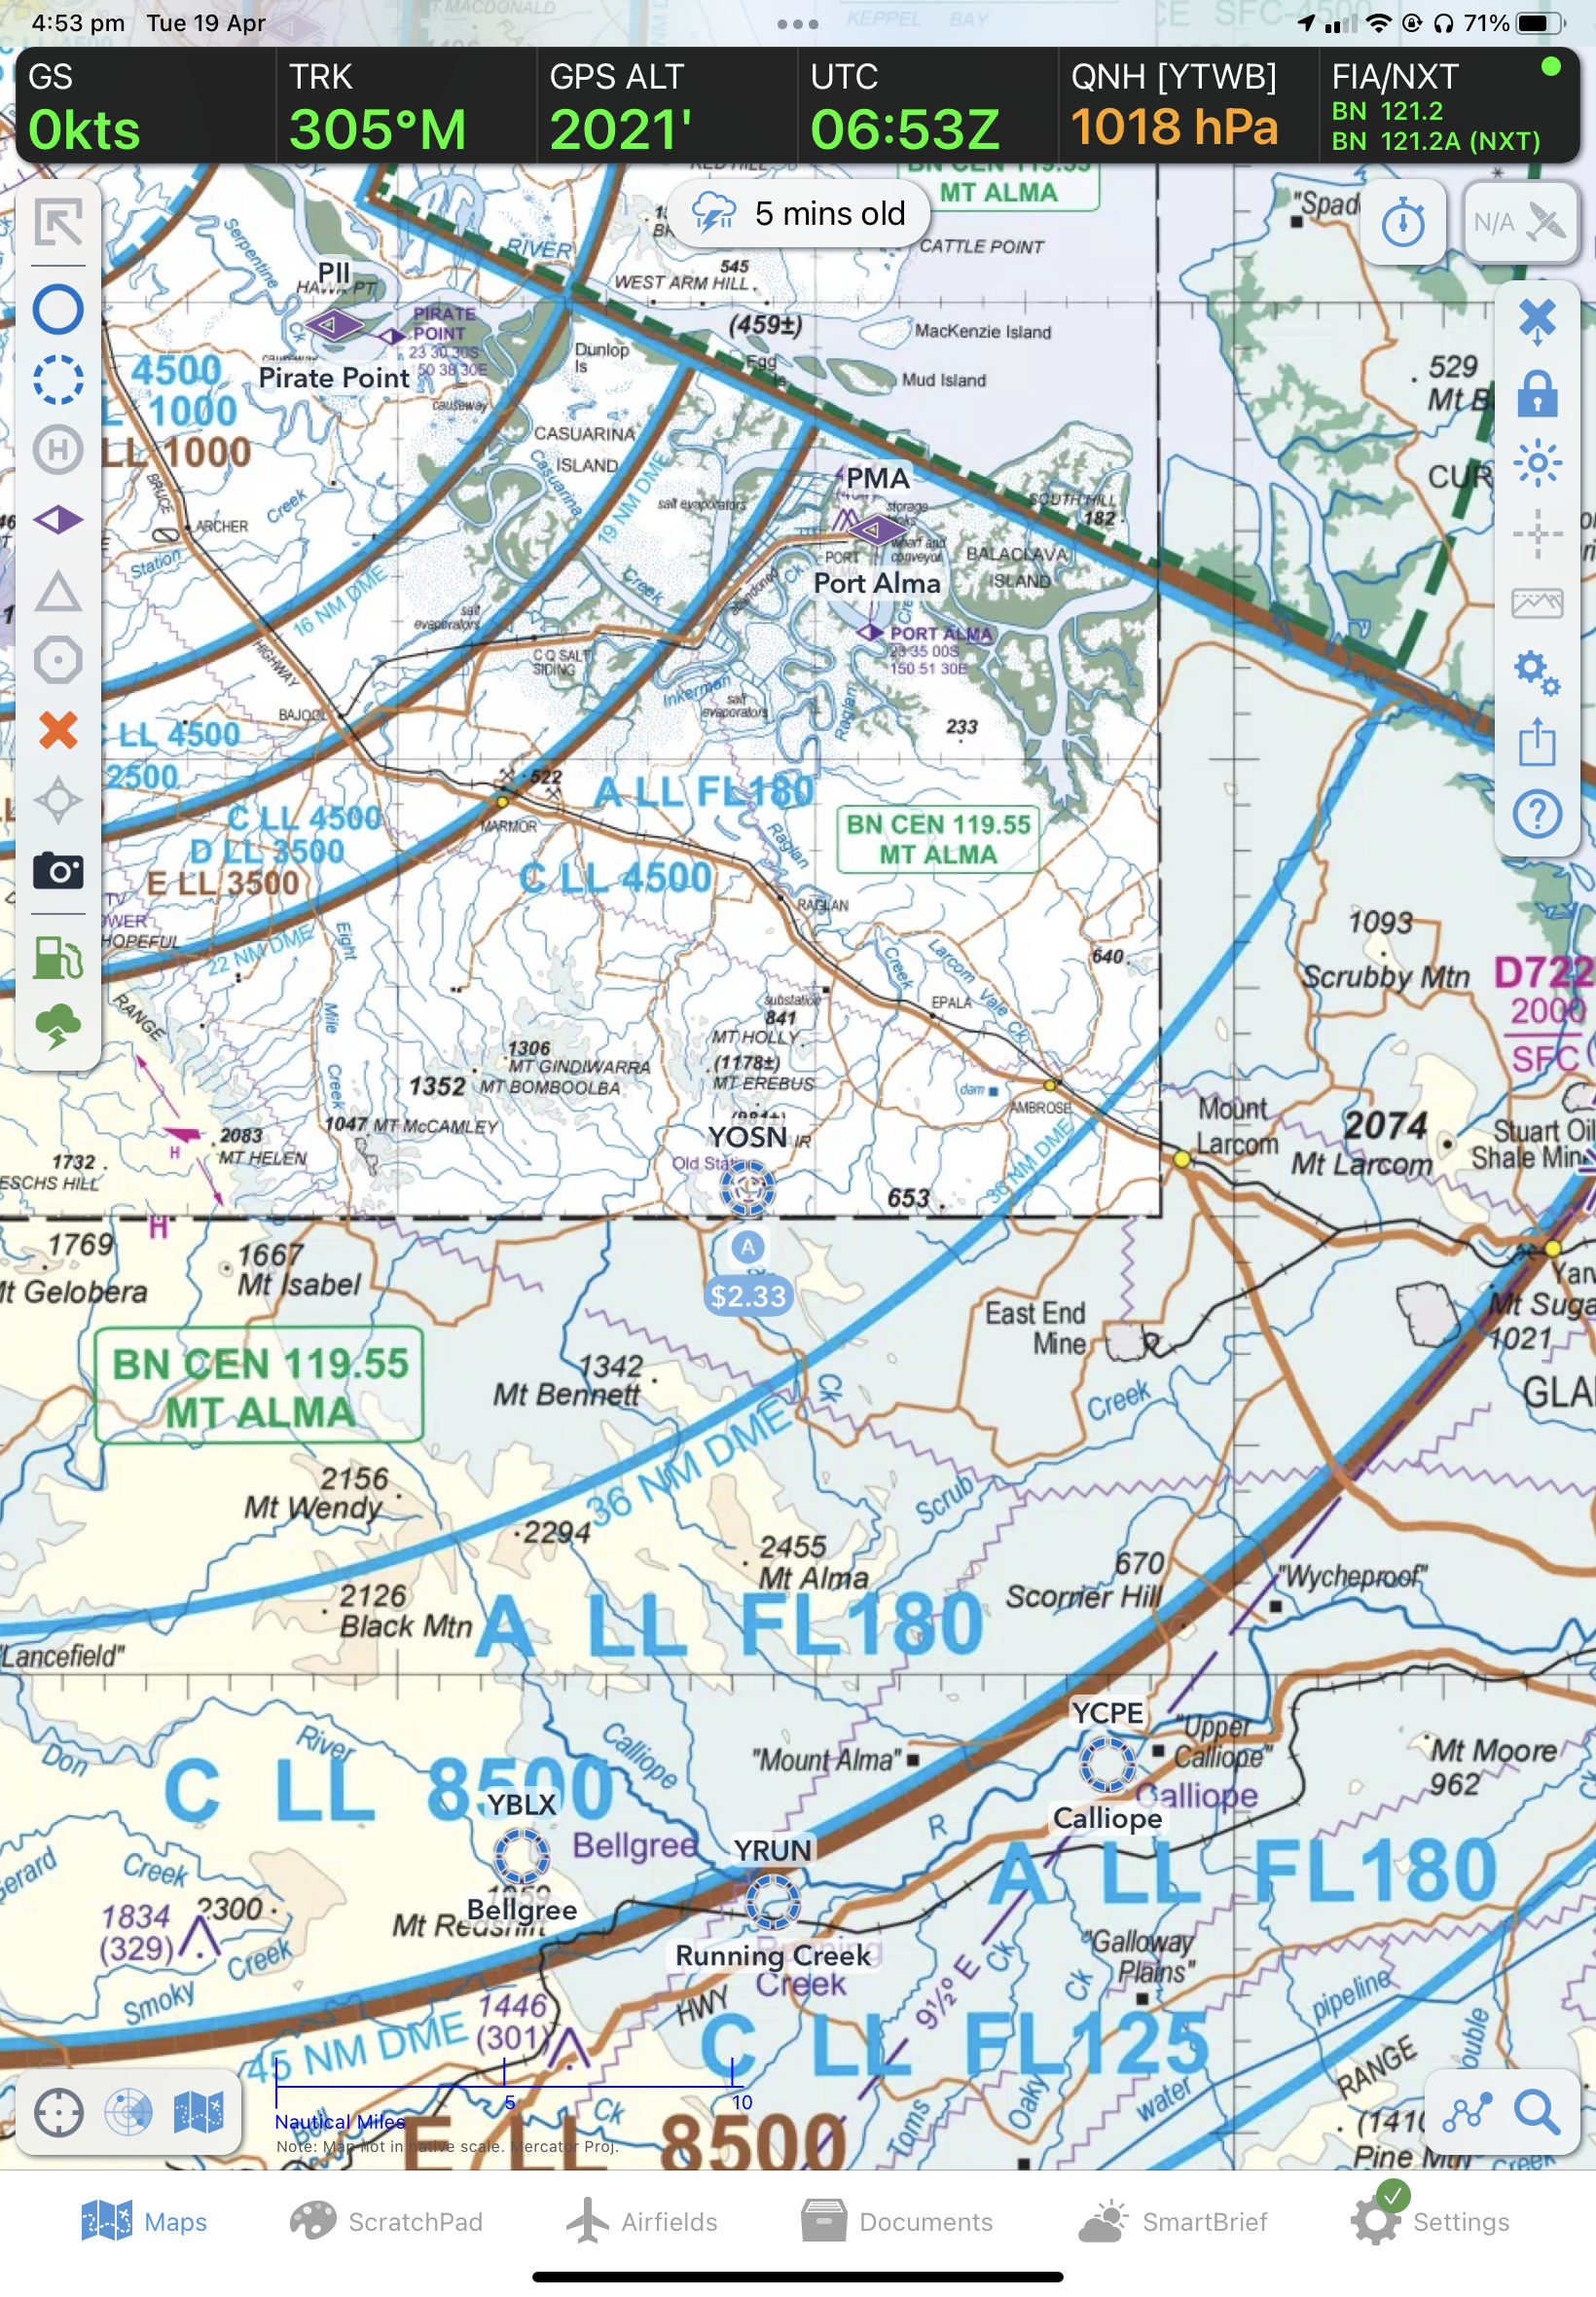 Unofficial NOTAM Old Station Fly-in